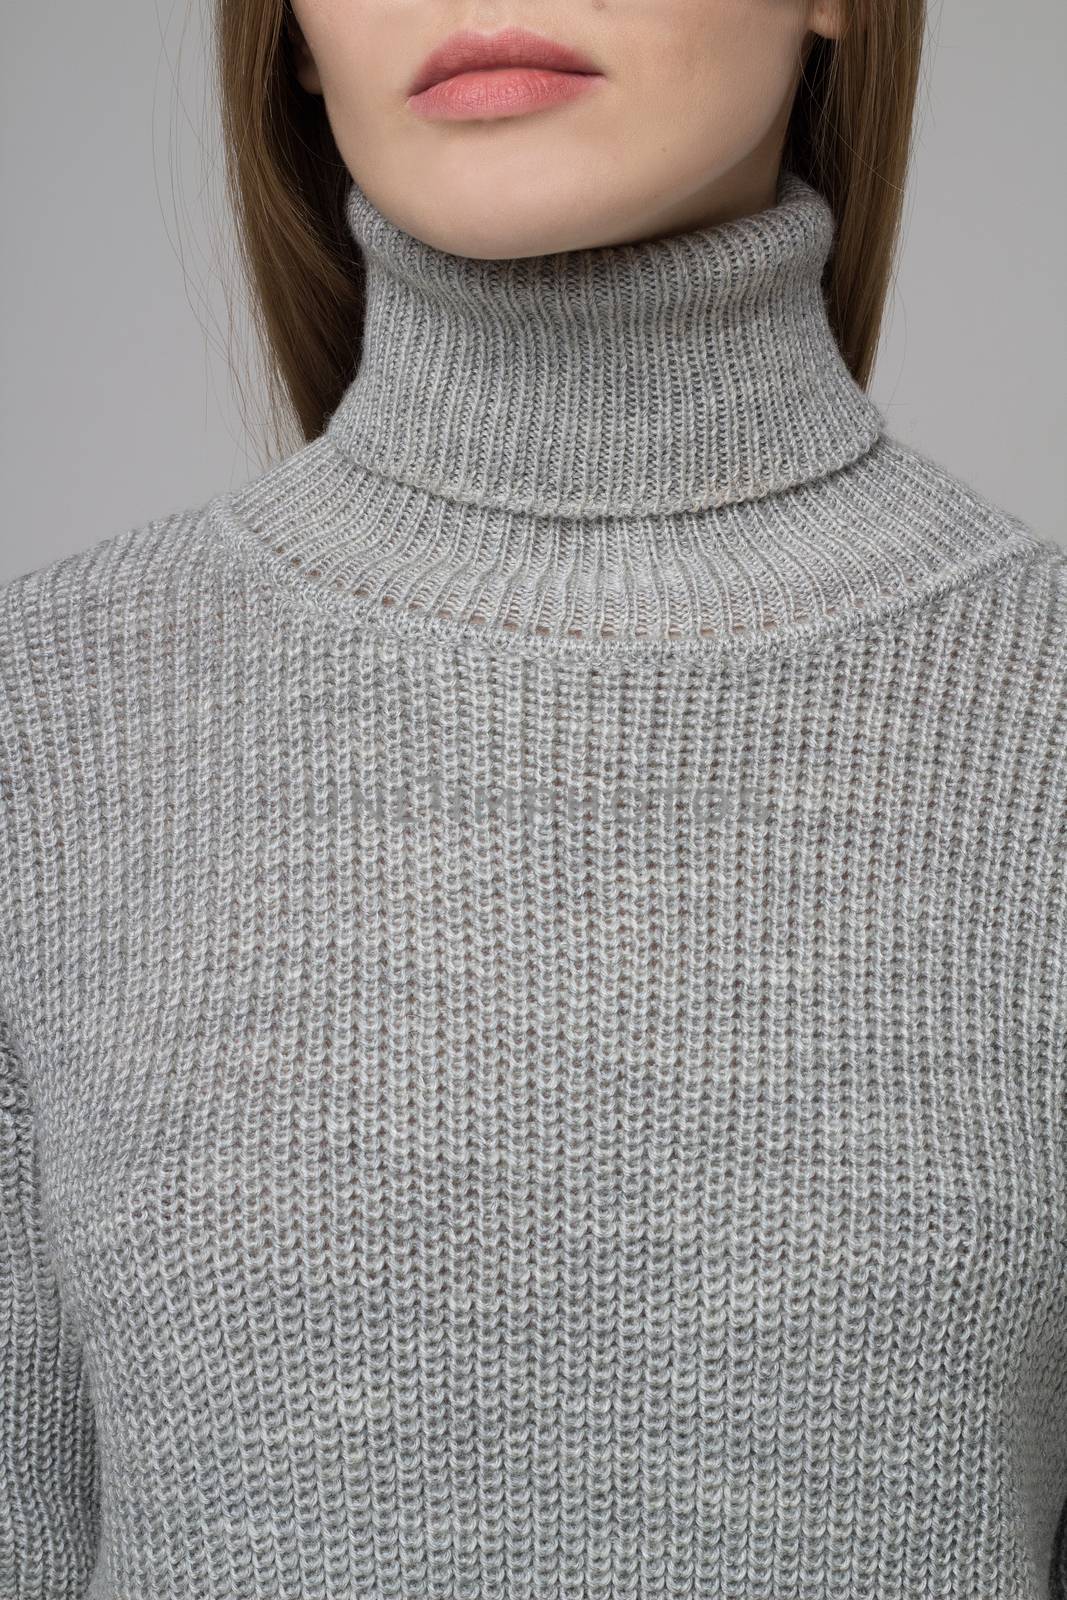 Female model corpus close-up in grey knitted dress